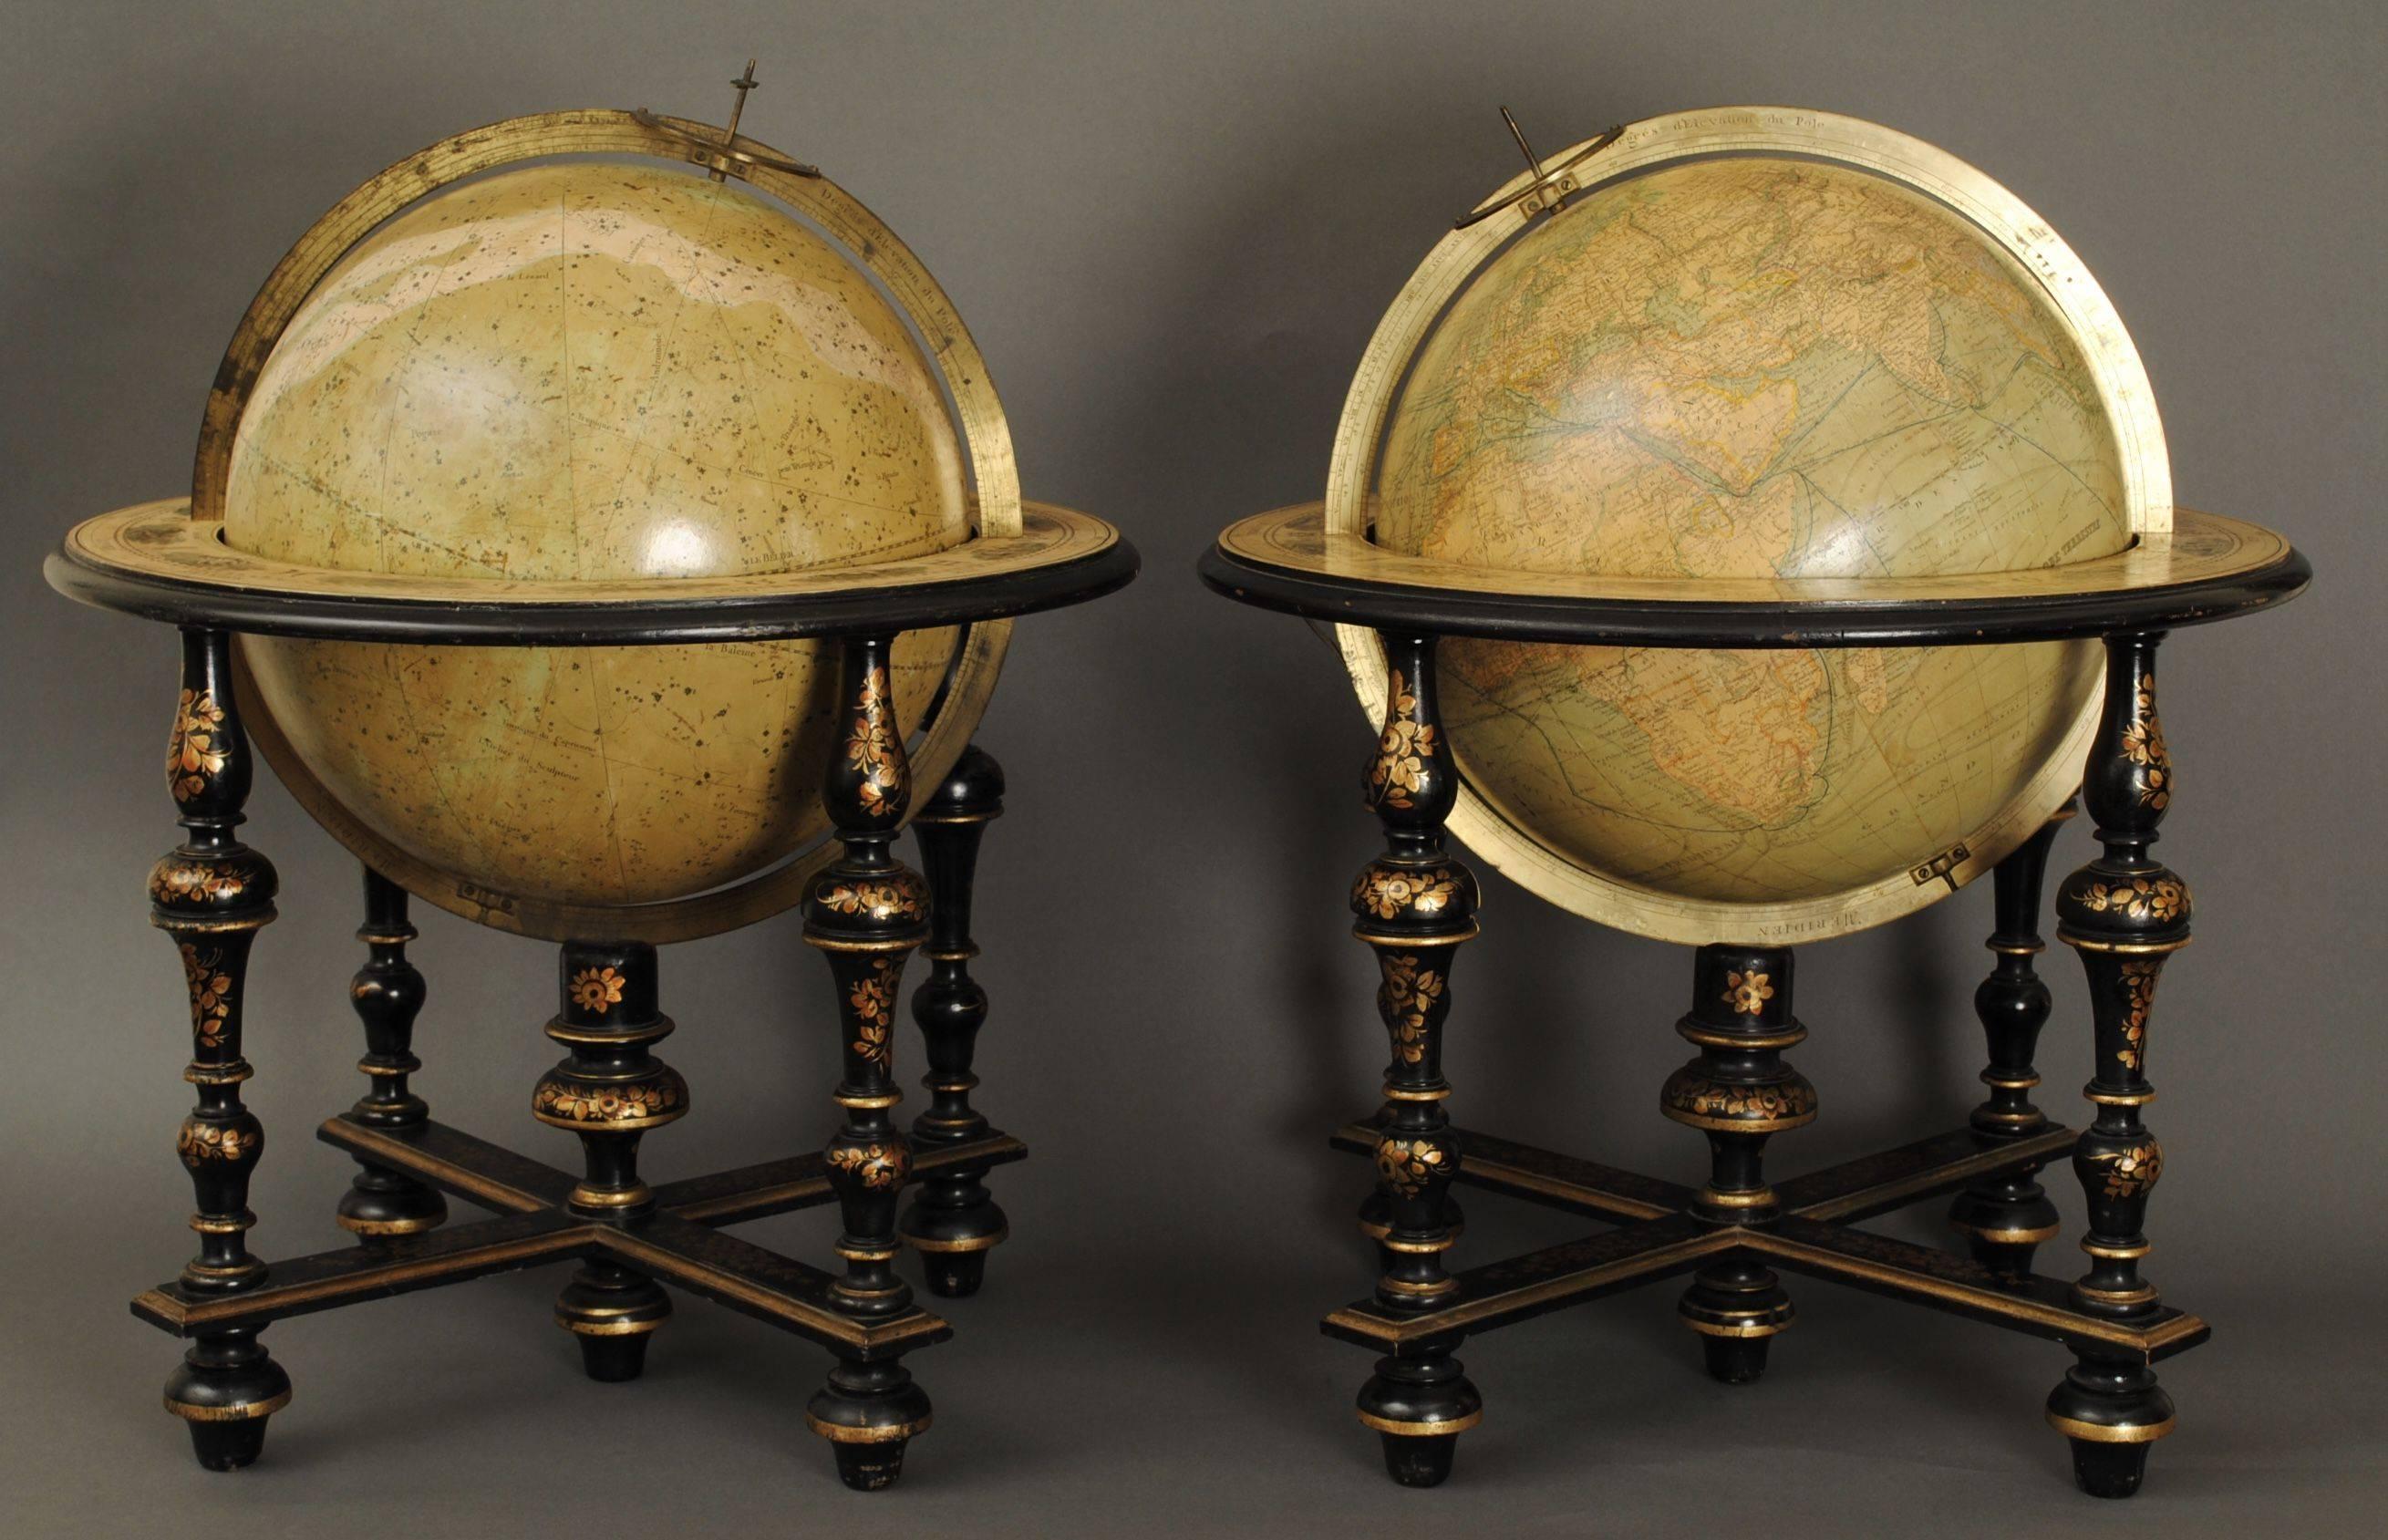 A wonderful pair of 19th century table globes by Mansion Delamarche Paris, in superb original condition. The 12" globes in the original lacquered and gilt decorated stands.